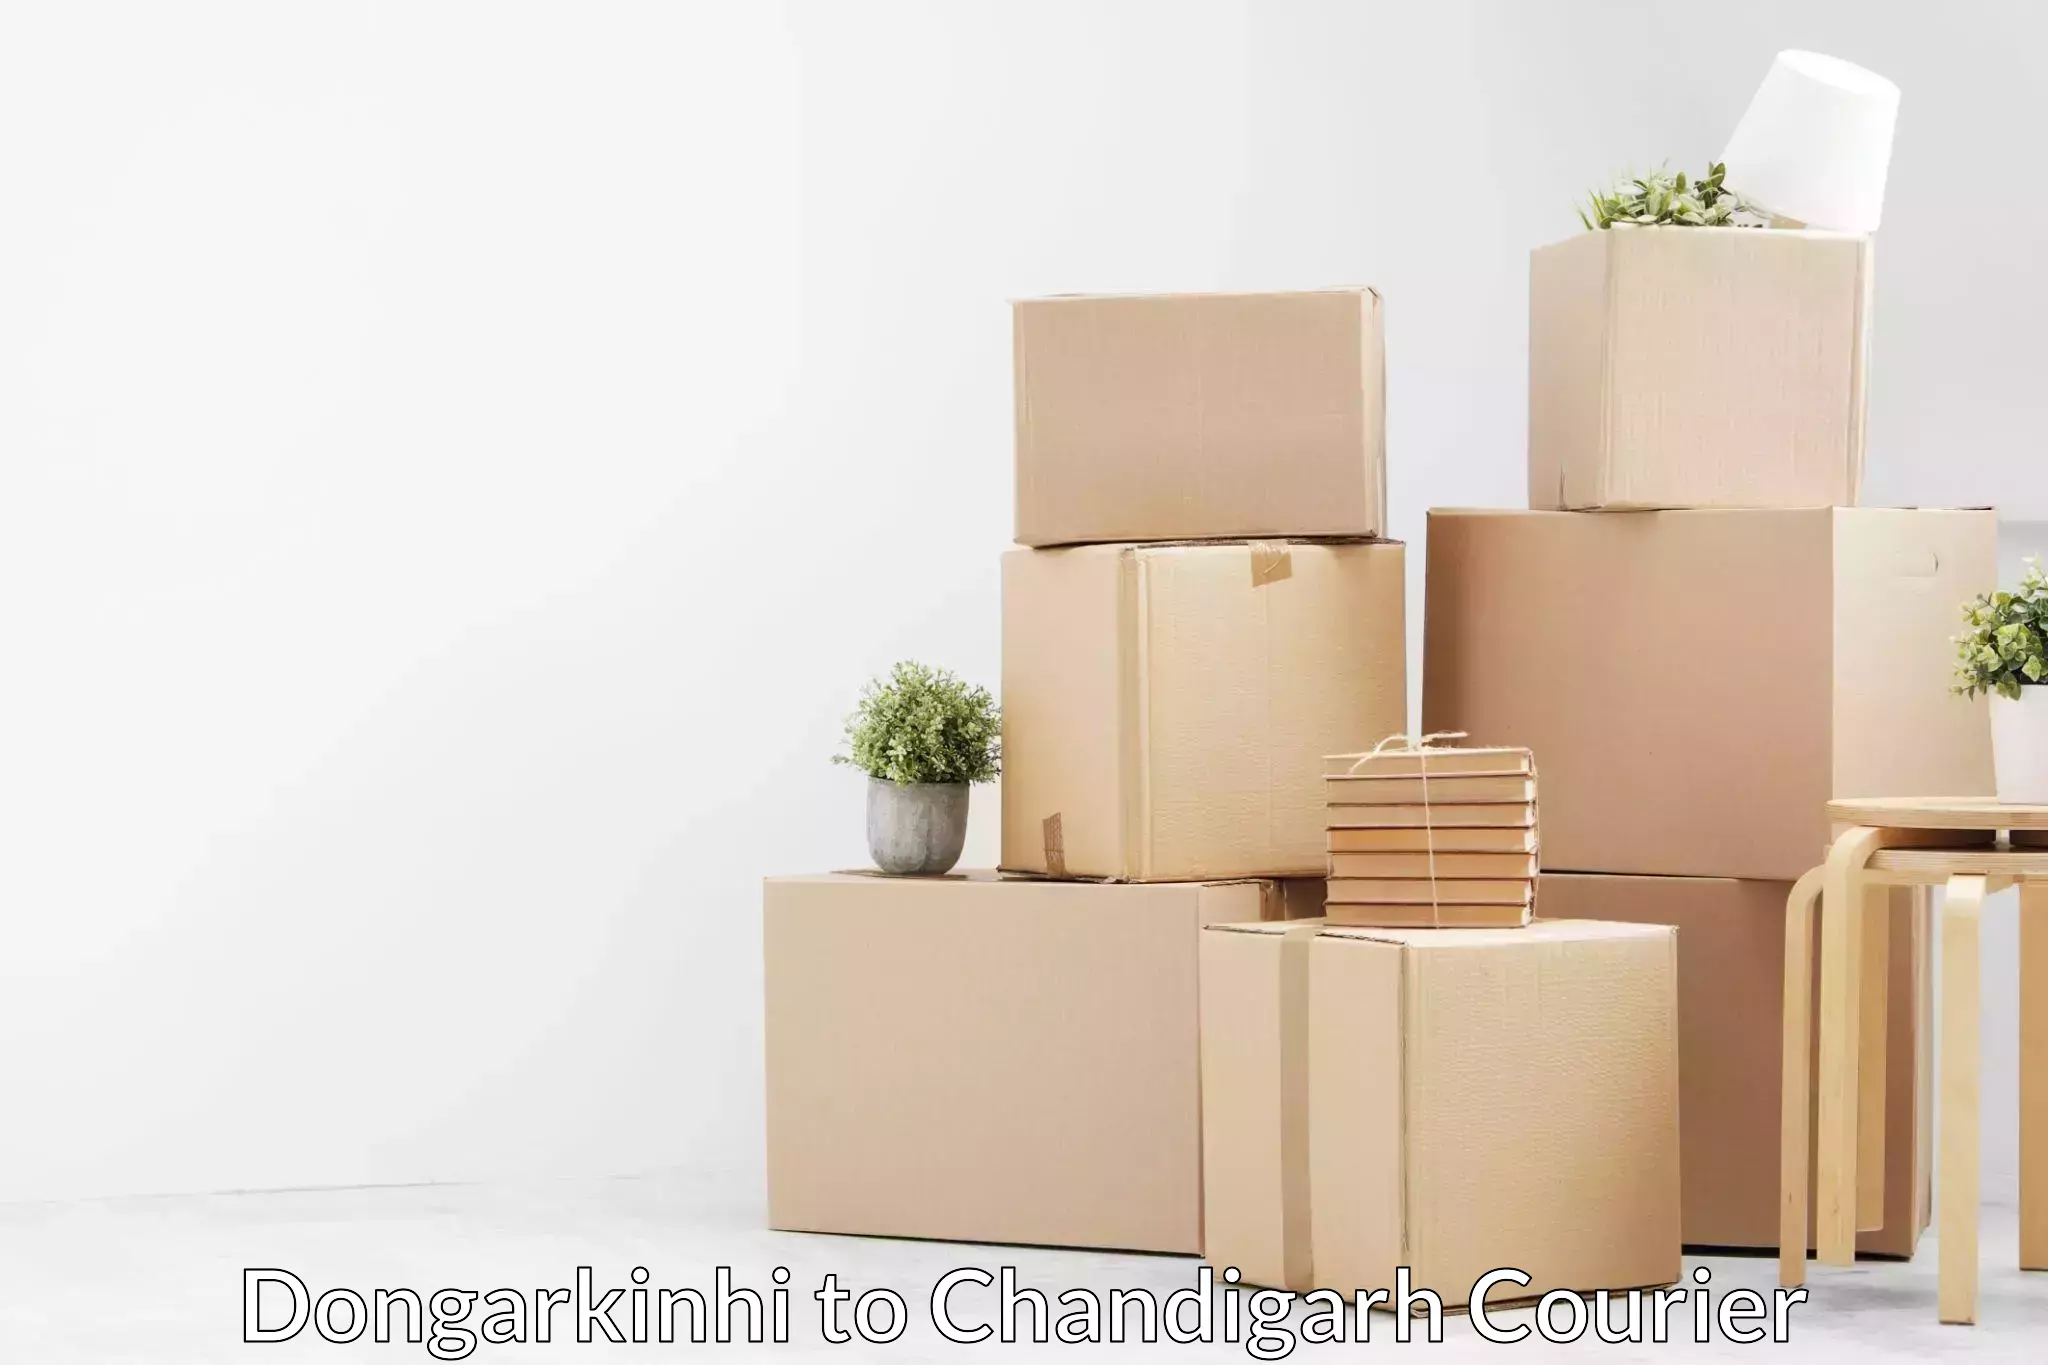 Furniture transport services Dongarkinhi to Chandigarh